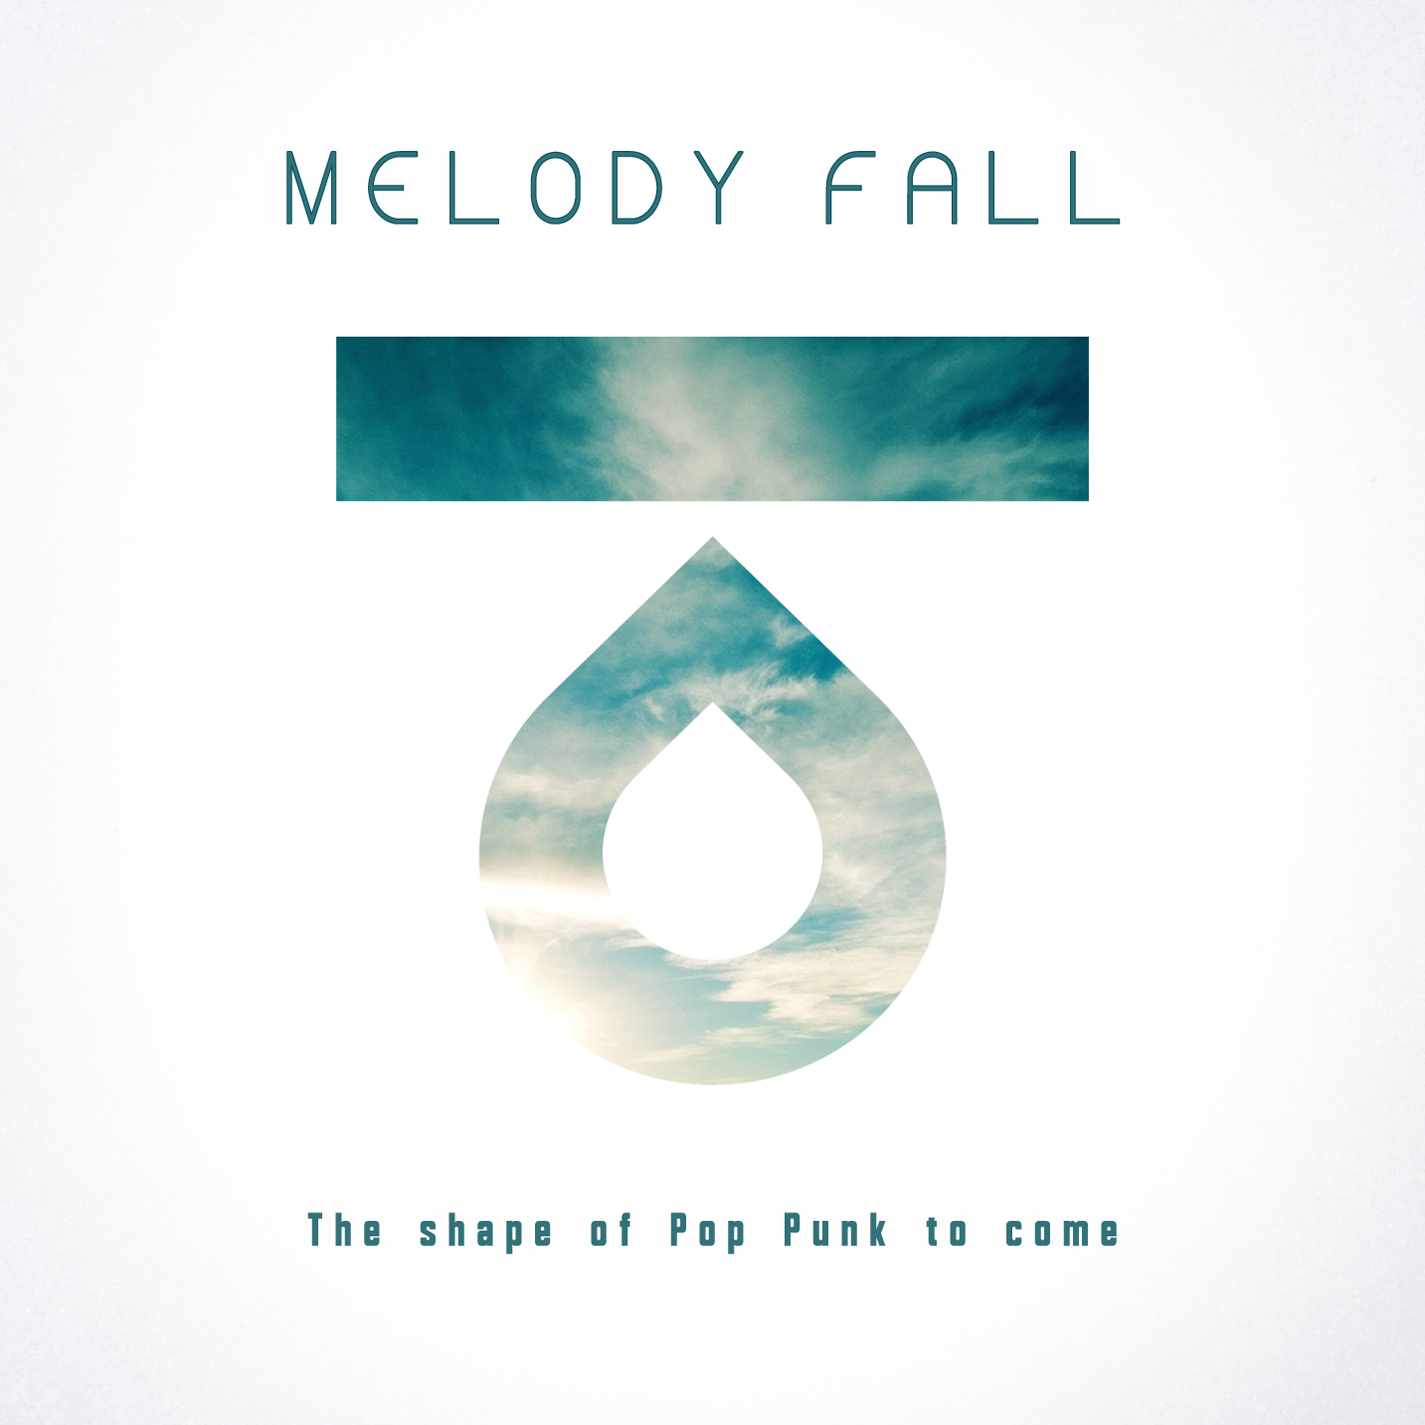 Melody Fall – The shape of pop punk to come